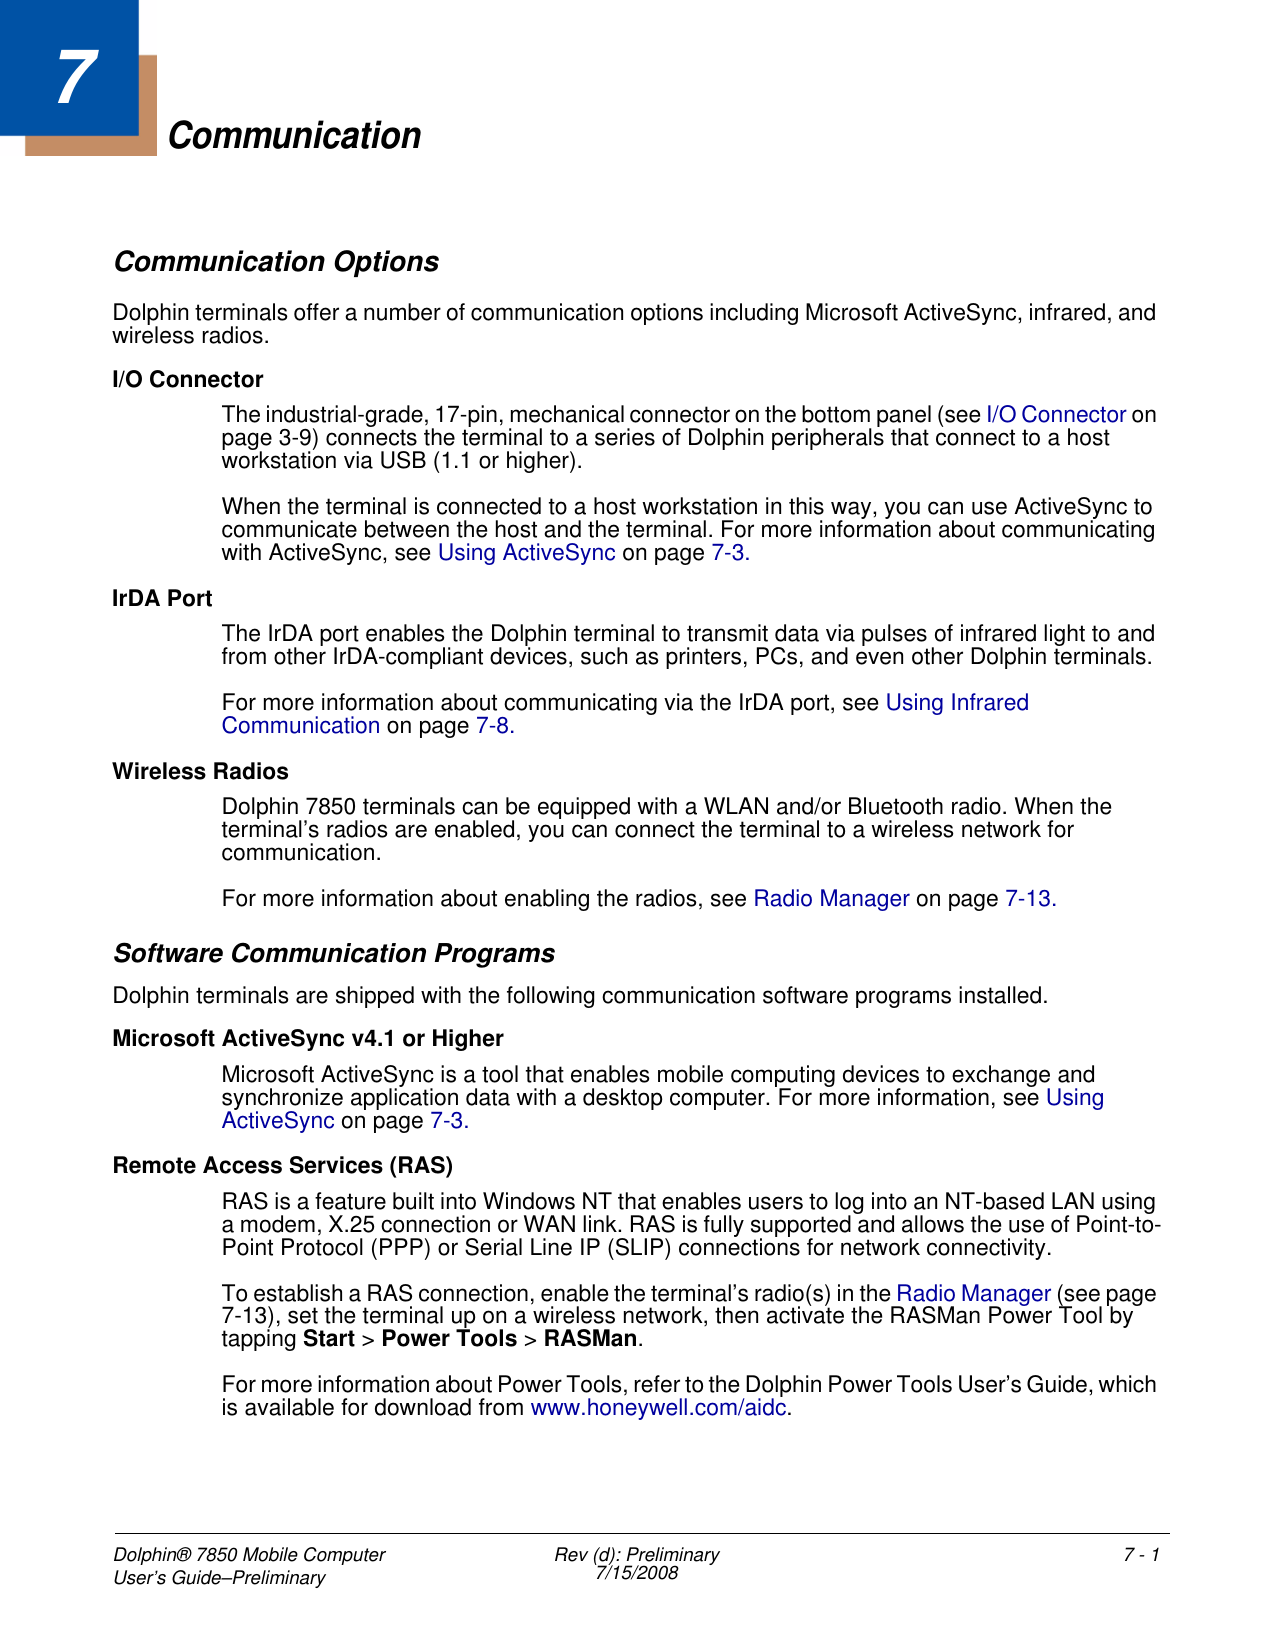 Dolphin® 7850 Mobile Computer User’s Guide–Preliminary  Rev (d): Preliminary7/15/2008 7 - 17CommunicationCommunication OptionsDolphin terminals offer a number of communication options including Microsoft ActiveSync, infrared, and wireless radios.I/O ConnectorThe industrial-grade, 17-pin, mechanical connector on the bottom panel (see I/O Connector on page 3-9) connects the terminal to a series of Dolphin peripherals that connect to a host workstation via USB (1.1 or higher). When the terminal is connected to a host workstation in this way, you can use ActiveSync to communicate between the host and the terminal. For more information about communicating with ActiveSync, see Using ActiveSync on page 7-3.IrDA PortThe IrDA port enables the Dolphin terminal to transmit data via pulses of infrared light to and from other IrDA-compliant devices, such as printers, PCs, and even other Dolphin terminals. For more information about communicating via the IrDA port, see Using Infrared Communication on page 7-8. Wireless RadiosDolphin 7850 terminals can be equipped with a WLAN and/or Bluetooth radio. When the terminal’s radios are enabled, you can connect the terminal to a wireless network for communication.For more information about enabling the radios, see Radio Manager on page 7-13.Software Communication ProgramsDolphin terminals are shipped with the following communication software programs installed.Microsoft ActiveSync v4.1 or HigherMicrosoft ActiveSync is a tool that enables mobile computing devices to exchange and synchronize application data with a desktop computer. For more information, see Using ActiveSync on page 7-3.Remote Access Services (RAS)RAS is a feature built into Windows NT that enables users to log into an NT-based LAN using a modem, X.25 connection or WAN link. RAS is fully supported and allows the use of Point-to-Point Protocol (PPP) or Serial Line IP (SLIP) connections for network connectivity.To establish a RAS connection, enable the terminal’s radio(s) in the Radio Manager (see page 7-13), set the terminal up on a wireless network, then activate the RASMan Power Tool by tapping Start &gt; Power Tools &gt; RASMan. For more information about Power Tools, refer to the Dolphin Power Tools User’s Guide, which is available for download from www.honeywell.com/aidc.